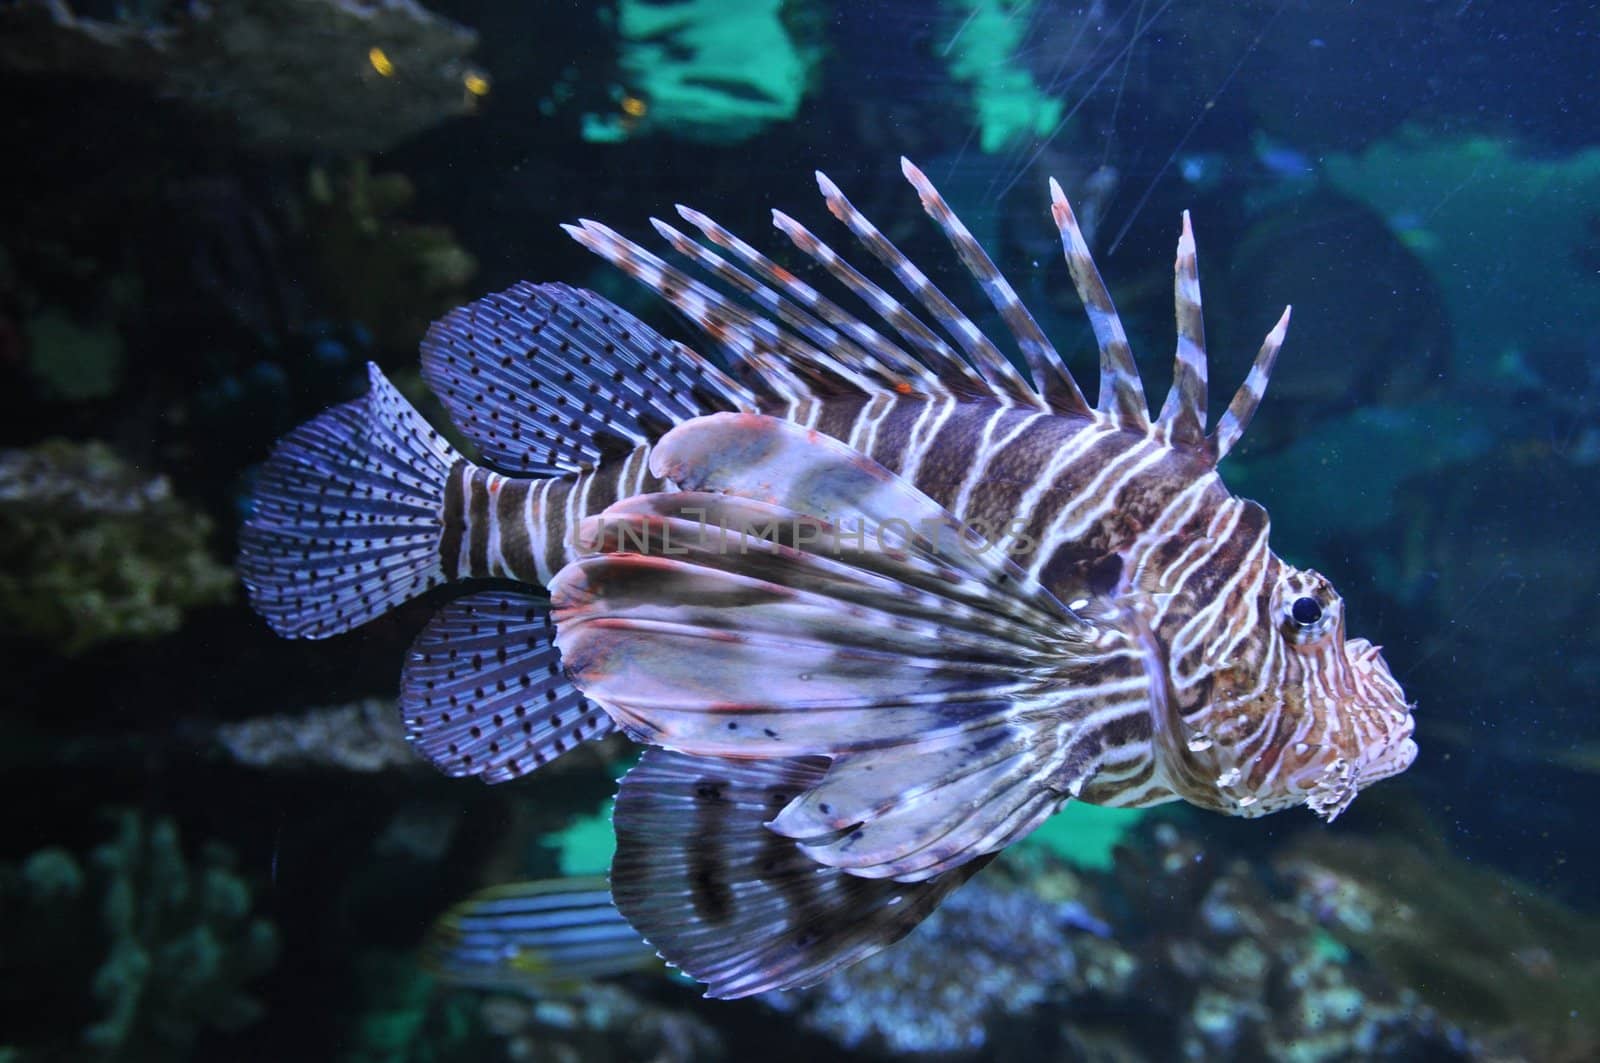 Lion fish in the water by anderm